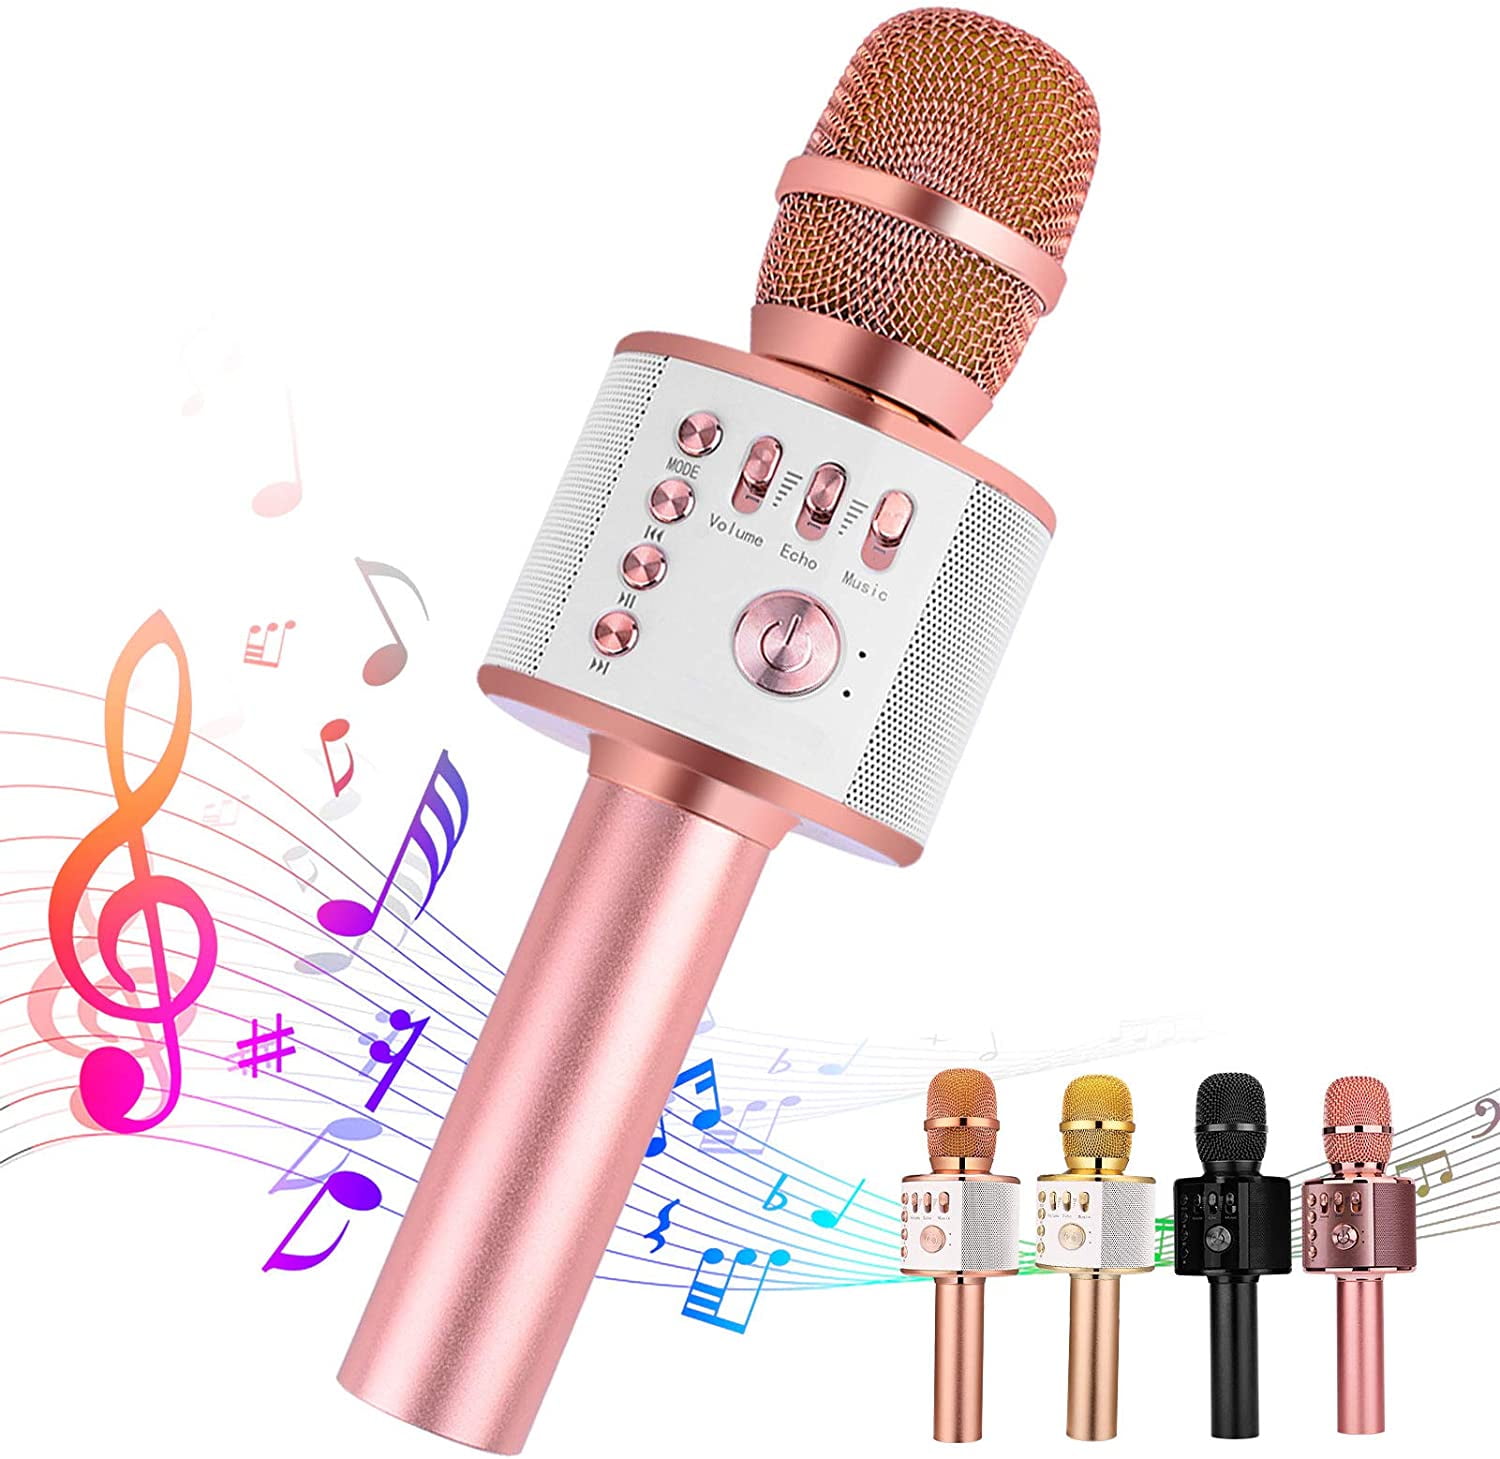 Wireless Karaoke Microphone Handheld Portable Bluetooth Karaoke Player Compatible with Android & iOS for Home KTV Party Muisc Playing Singing & Recording Wireless Bluetooth Karaoke Microphone 